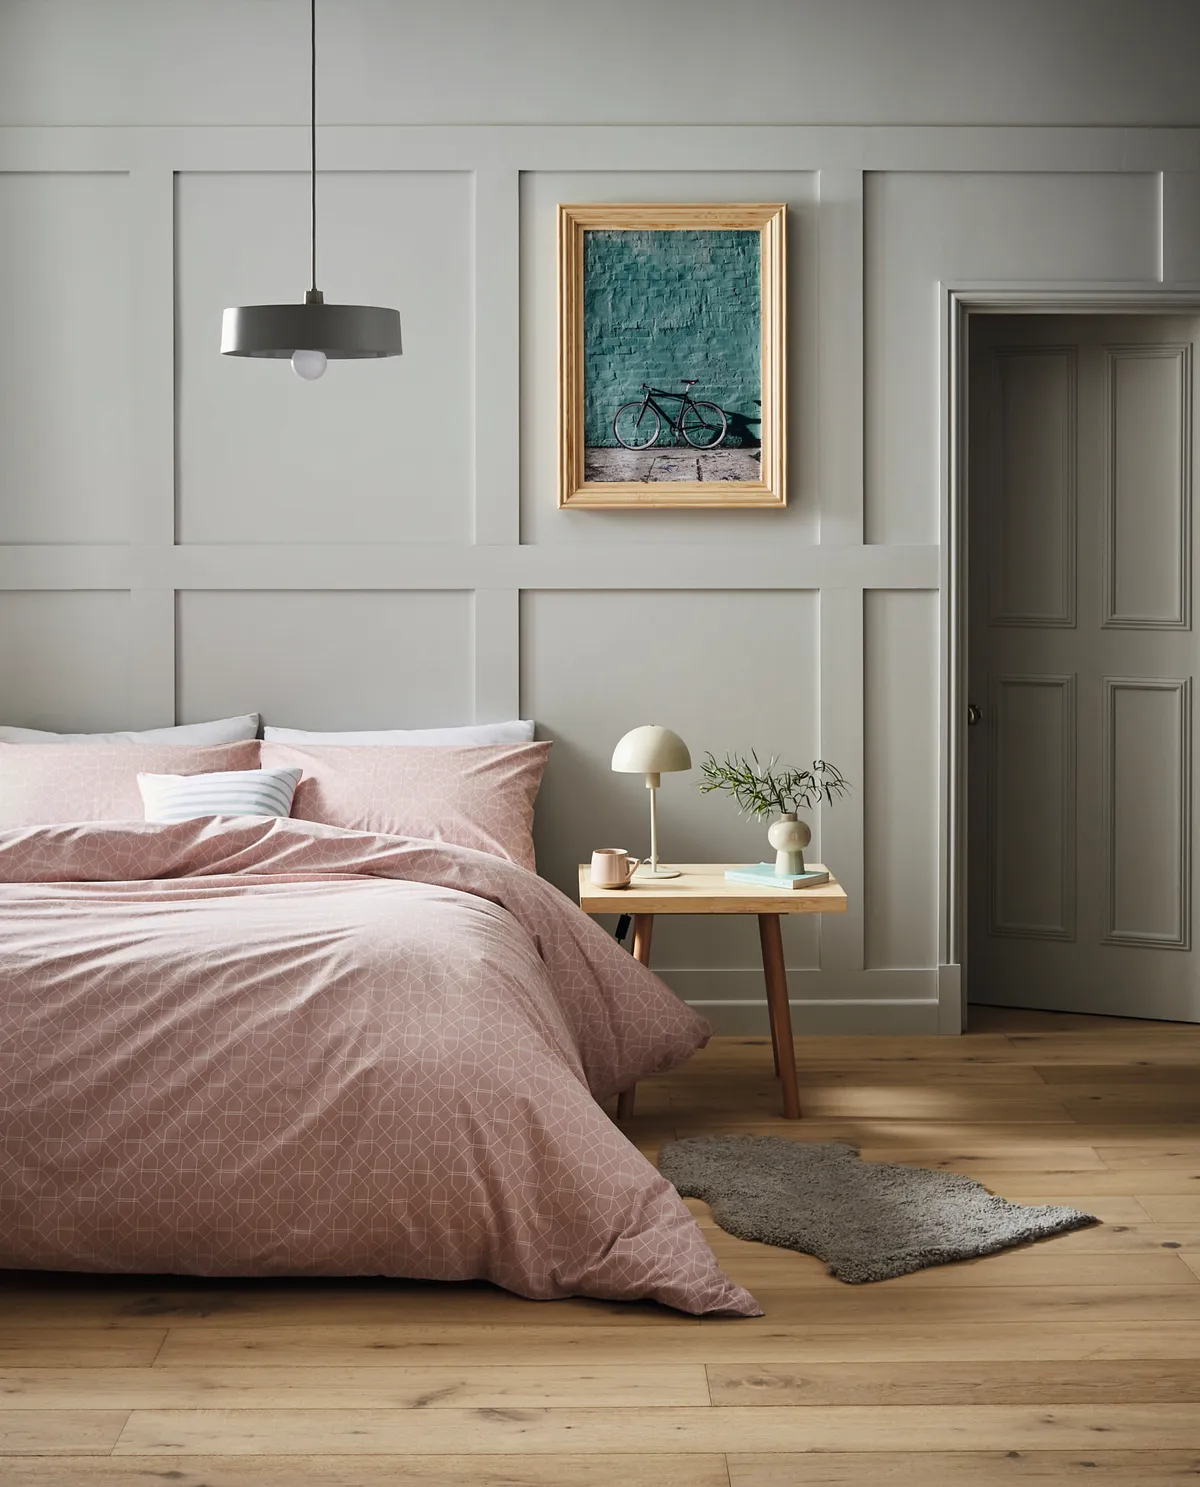 Pink duvet and bed against a panelled wall